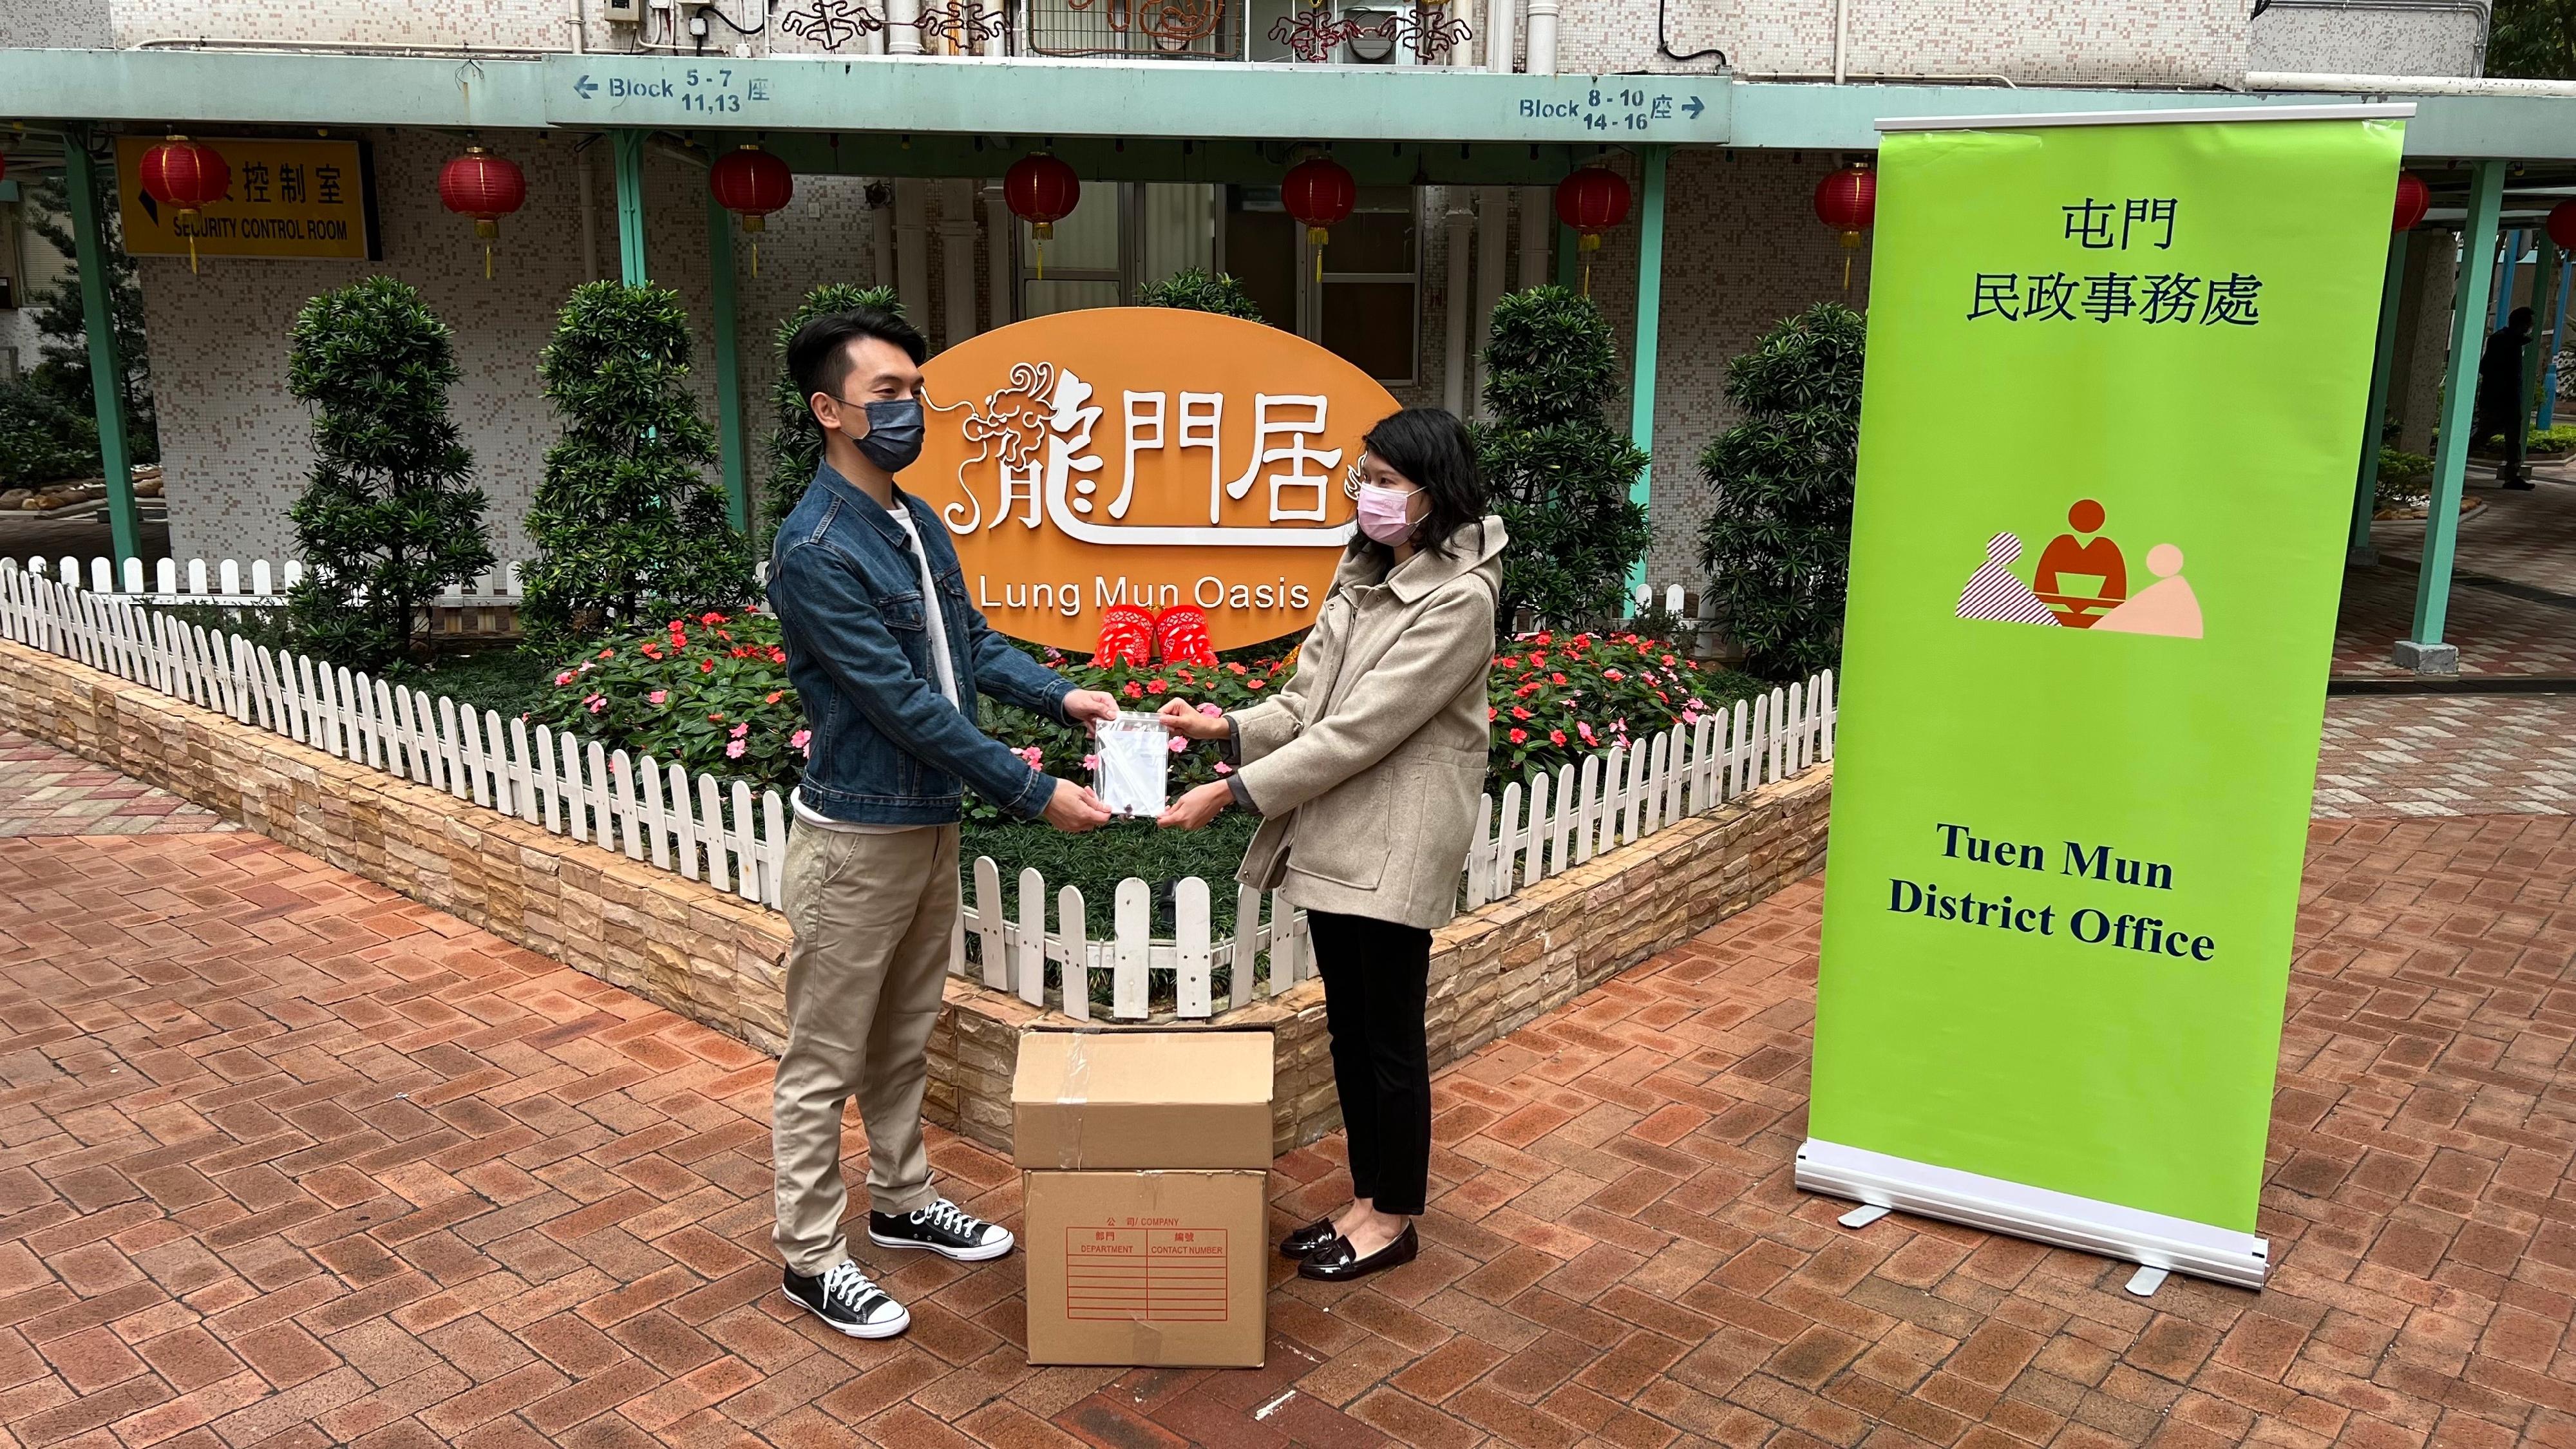 The Tuen Mun District Office today (February 13) distributed rapid test kits to cleansing workers and property management staff working in Lung Mun Oasis for voluntary testing through the property management company.
